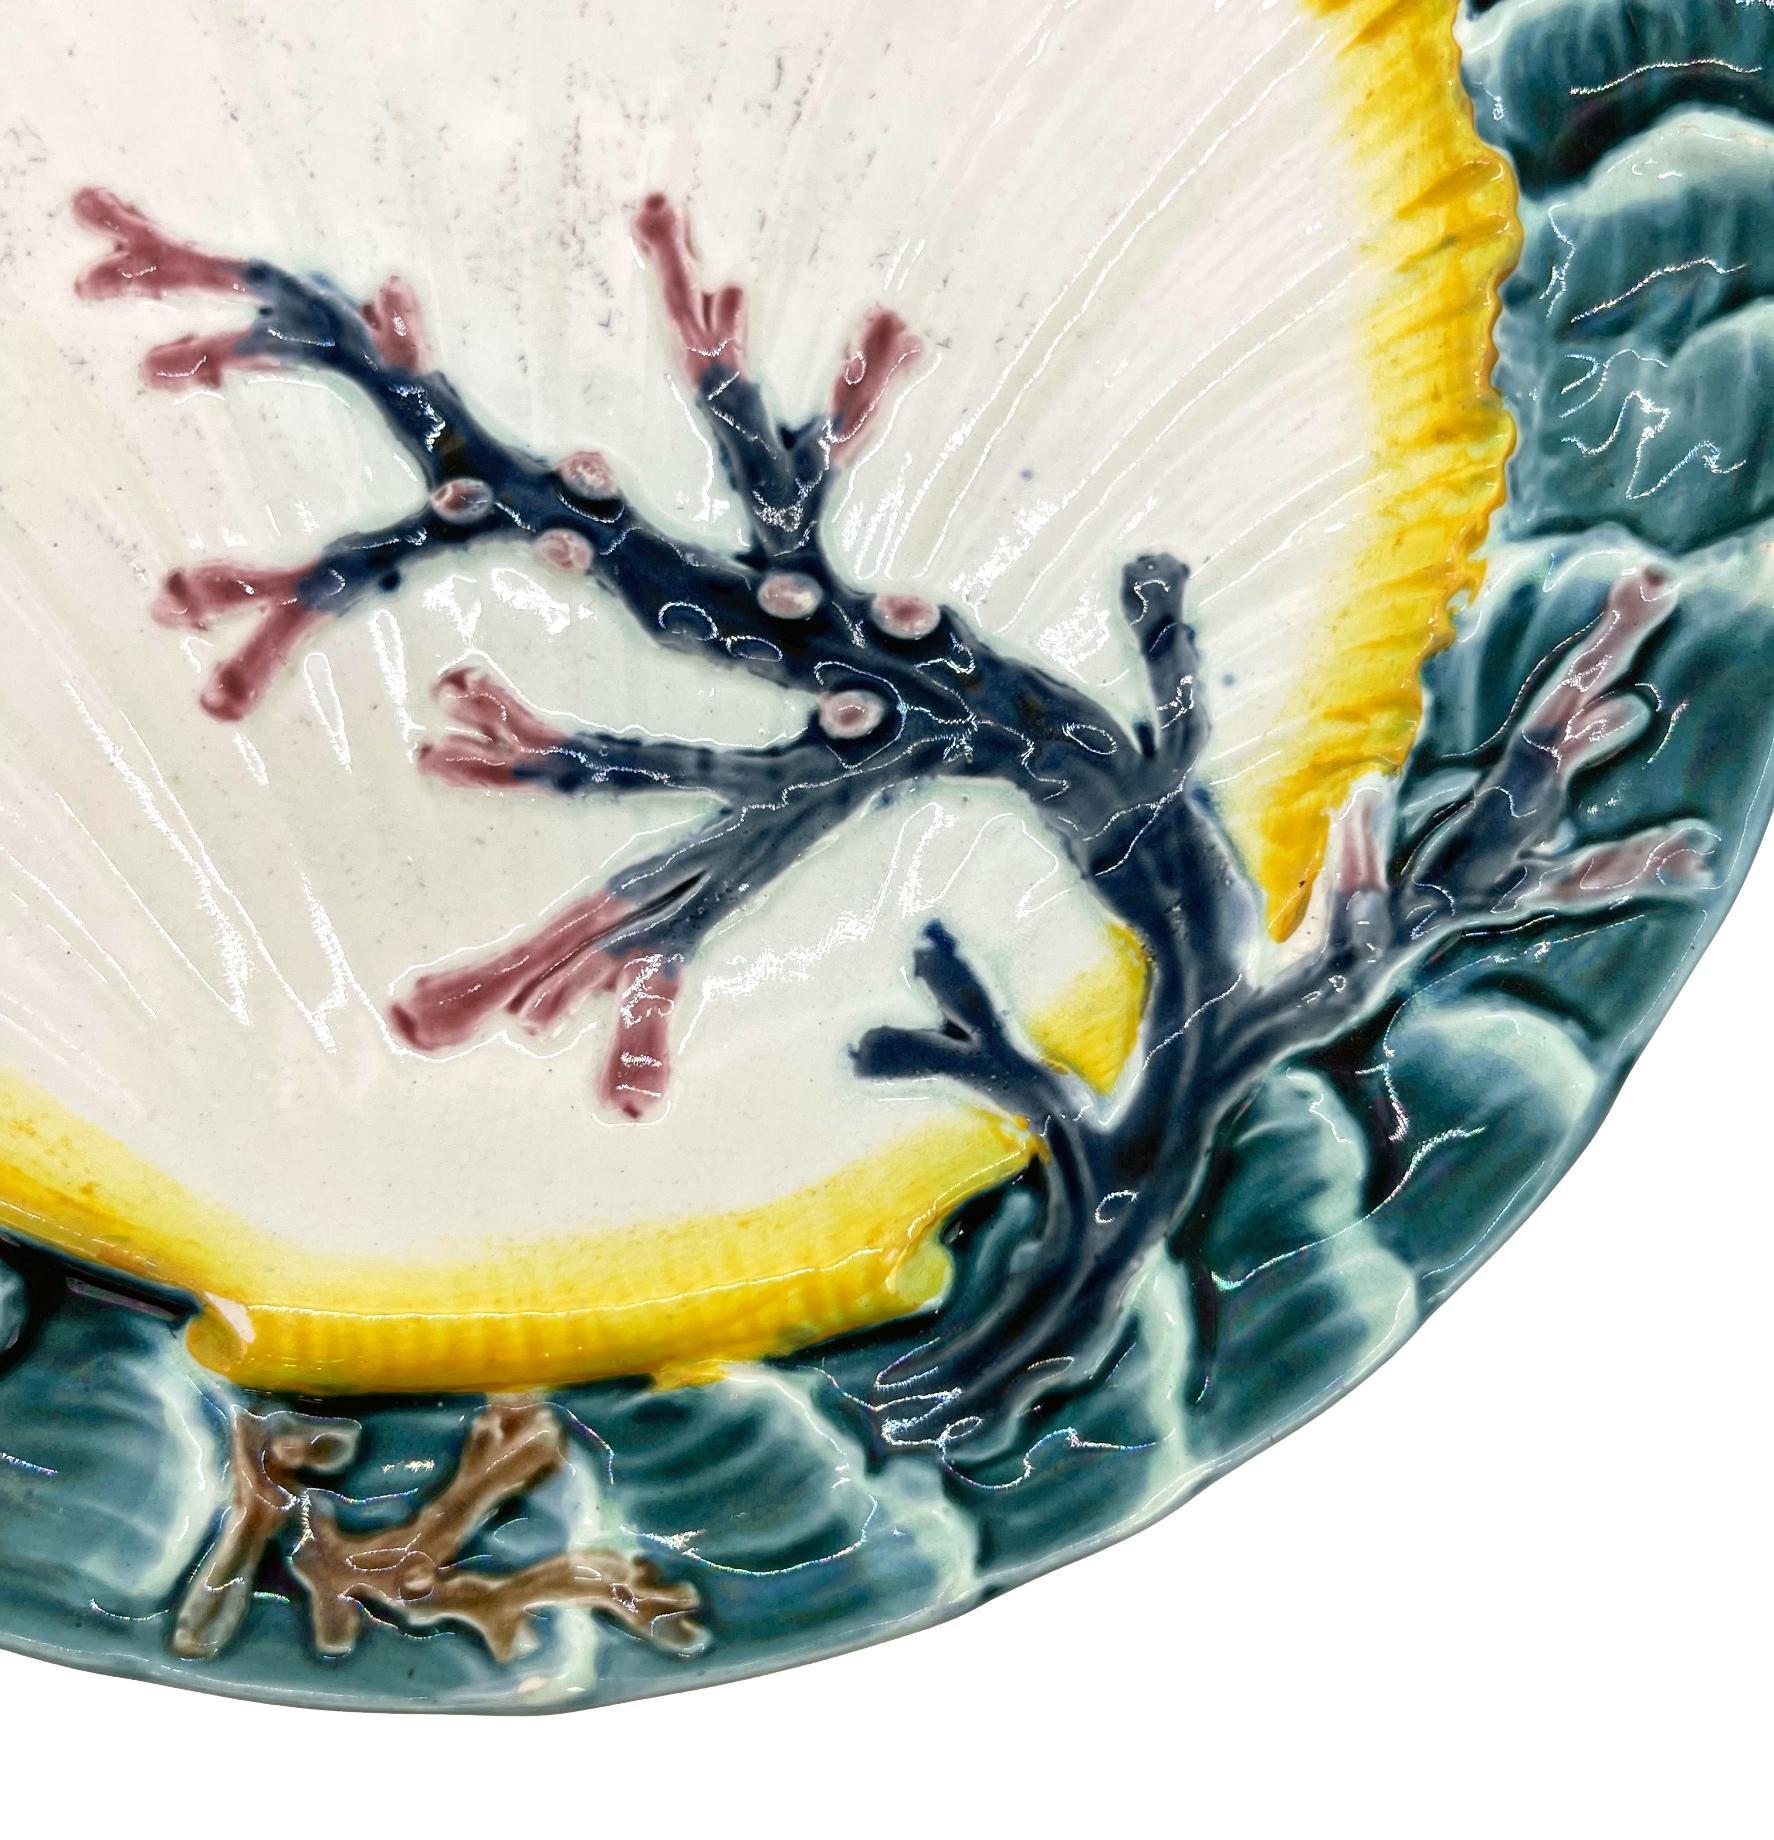 Wedgwood Majolica ocean plate, with a large central shell and seaweed, bordered with relief-molded waves, the reverse with impressed marks: 'WEDGWOOD,' and Wedgwood date letter, 'J' for 1881, with underglaze painted design number, '2949,' which